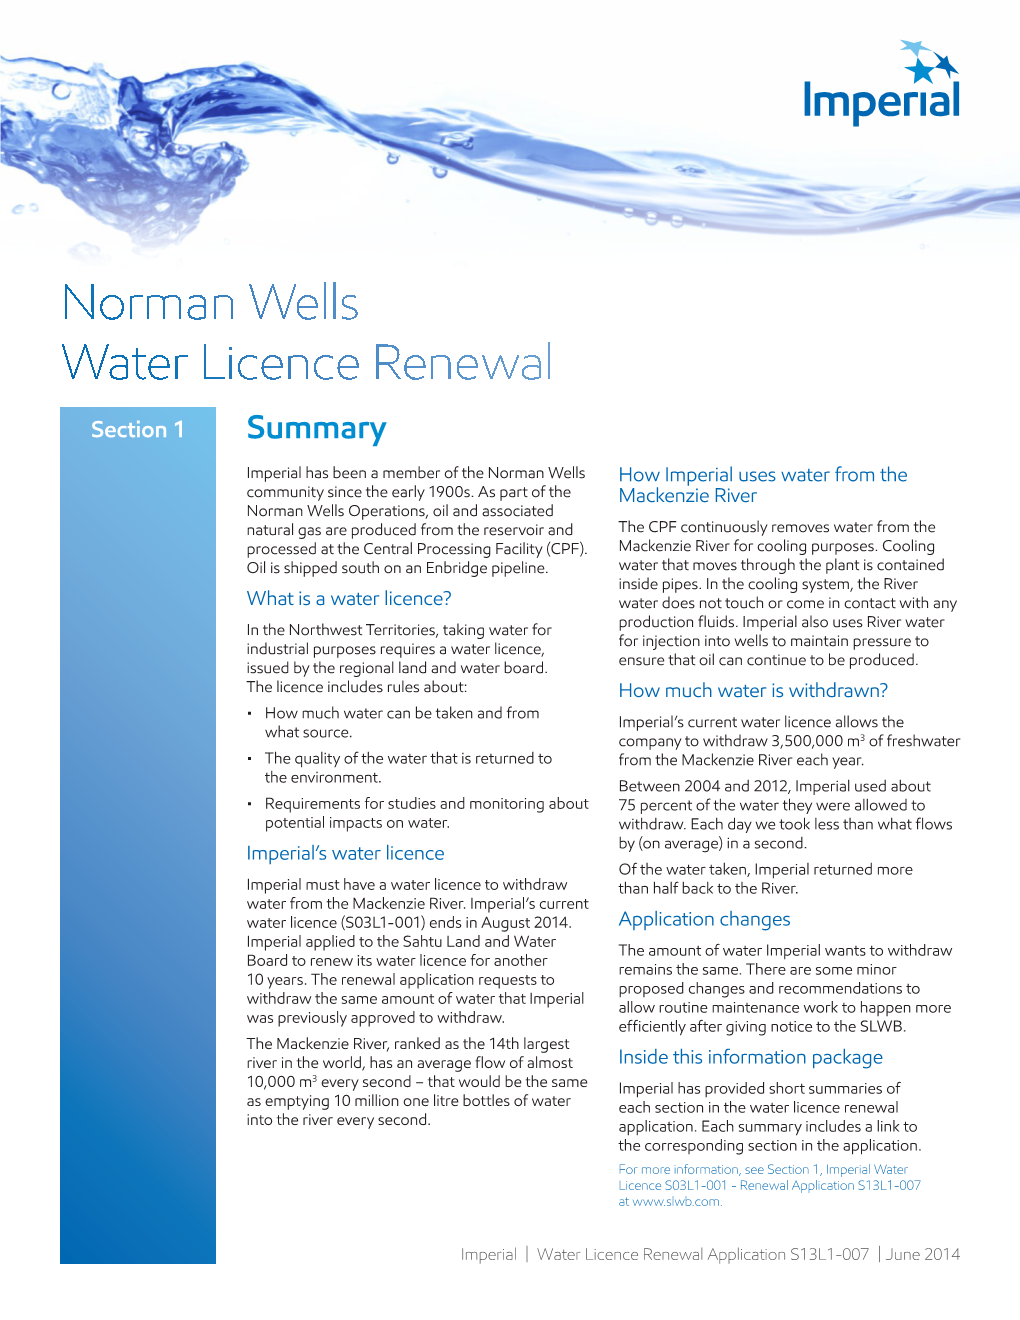 Norman Wells Water Licence Renewal